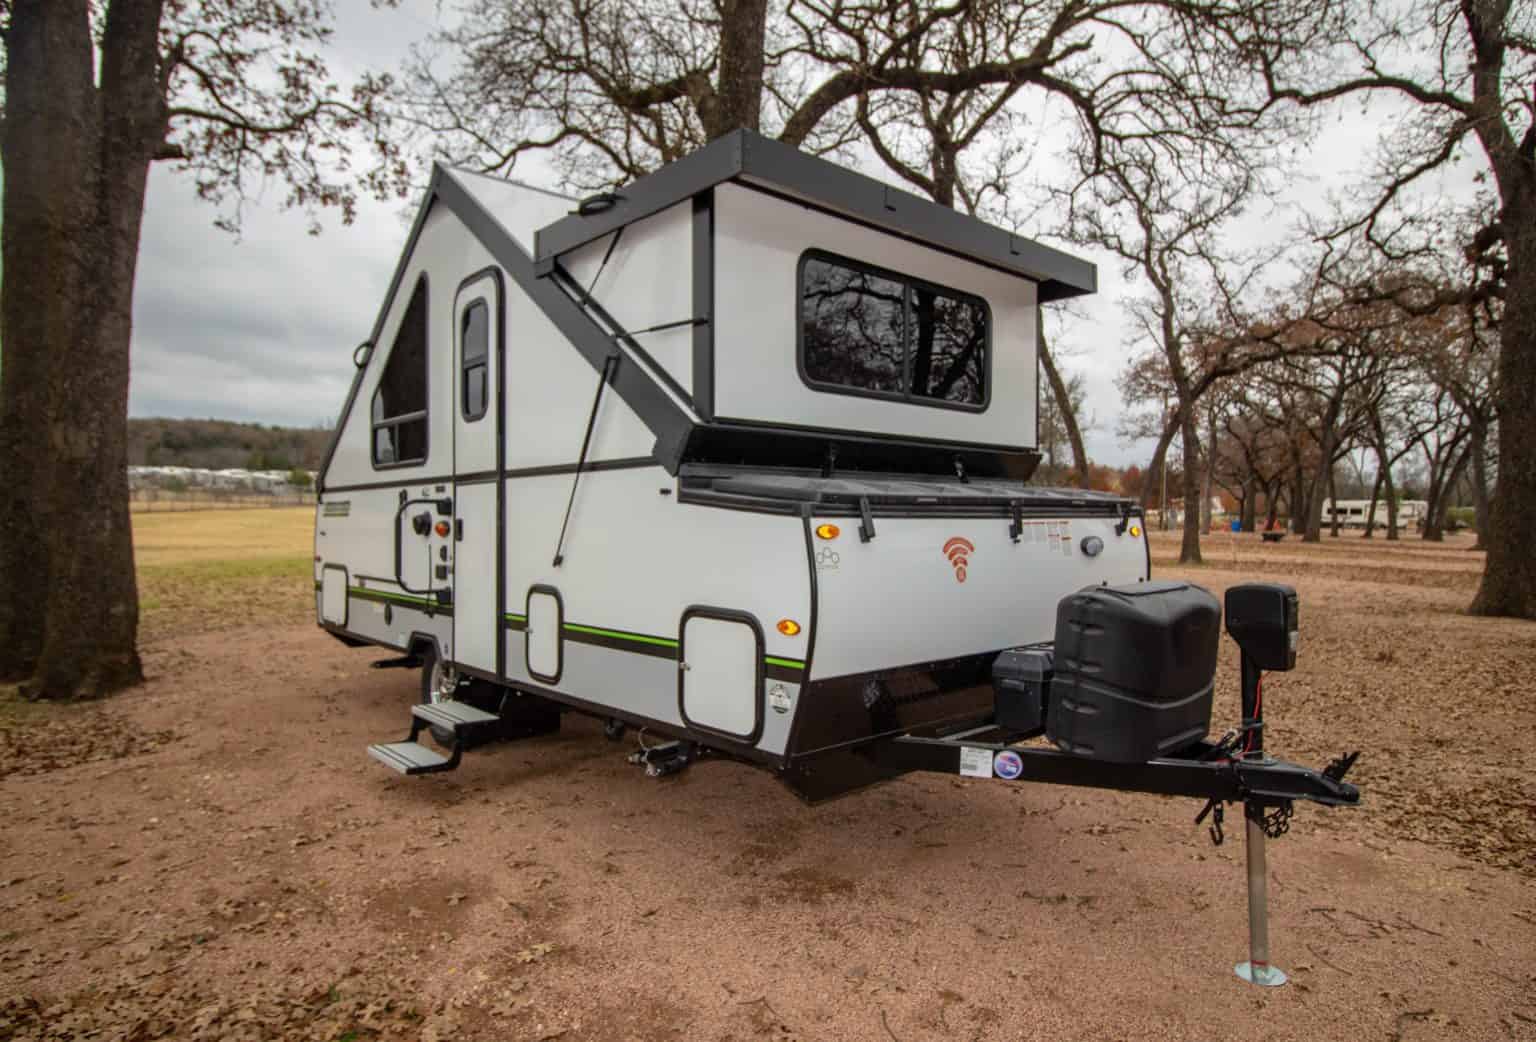 6 Best Hard Sided Pop Up Campers (Updated December 2020) Best Hard Sided Pop Up Camper With Bathroom